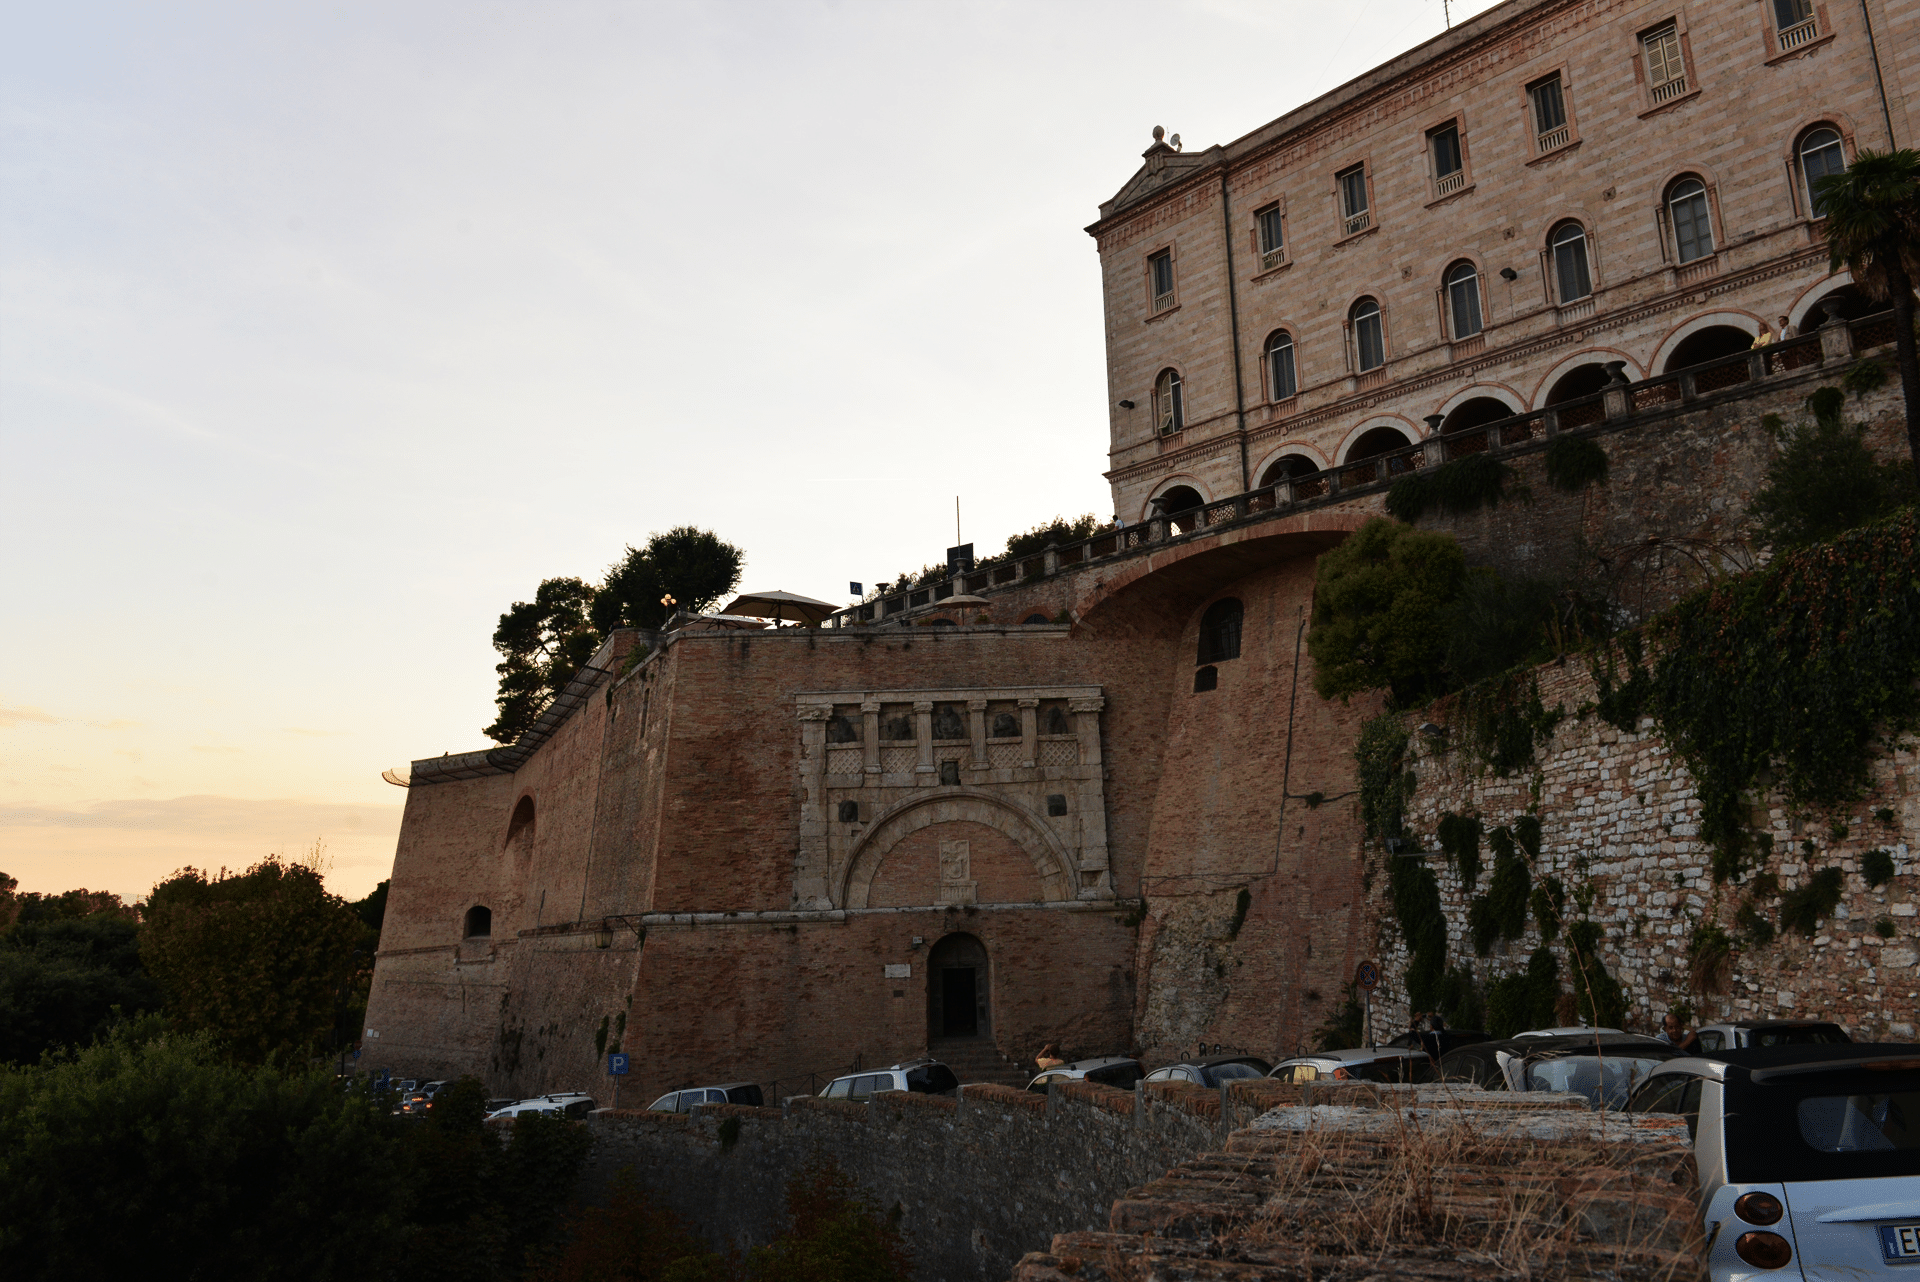 Rocca Paolina Overview